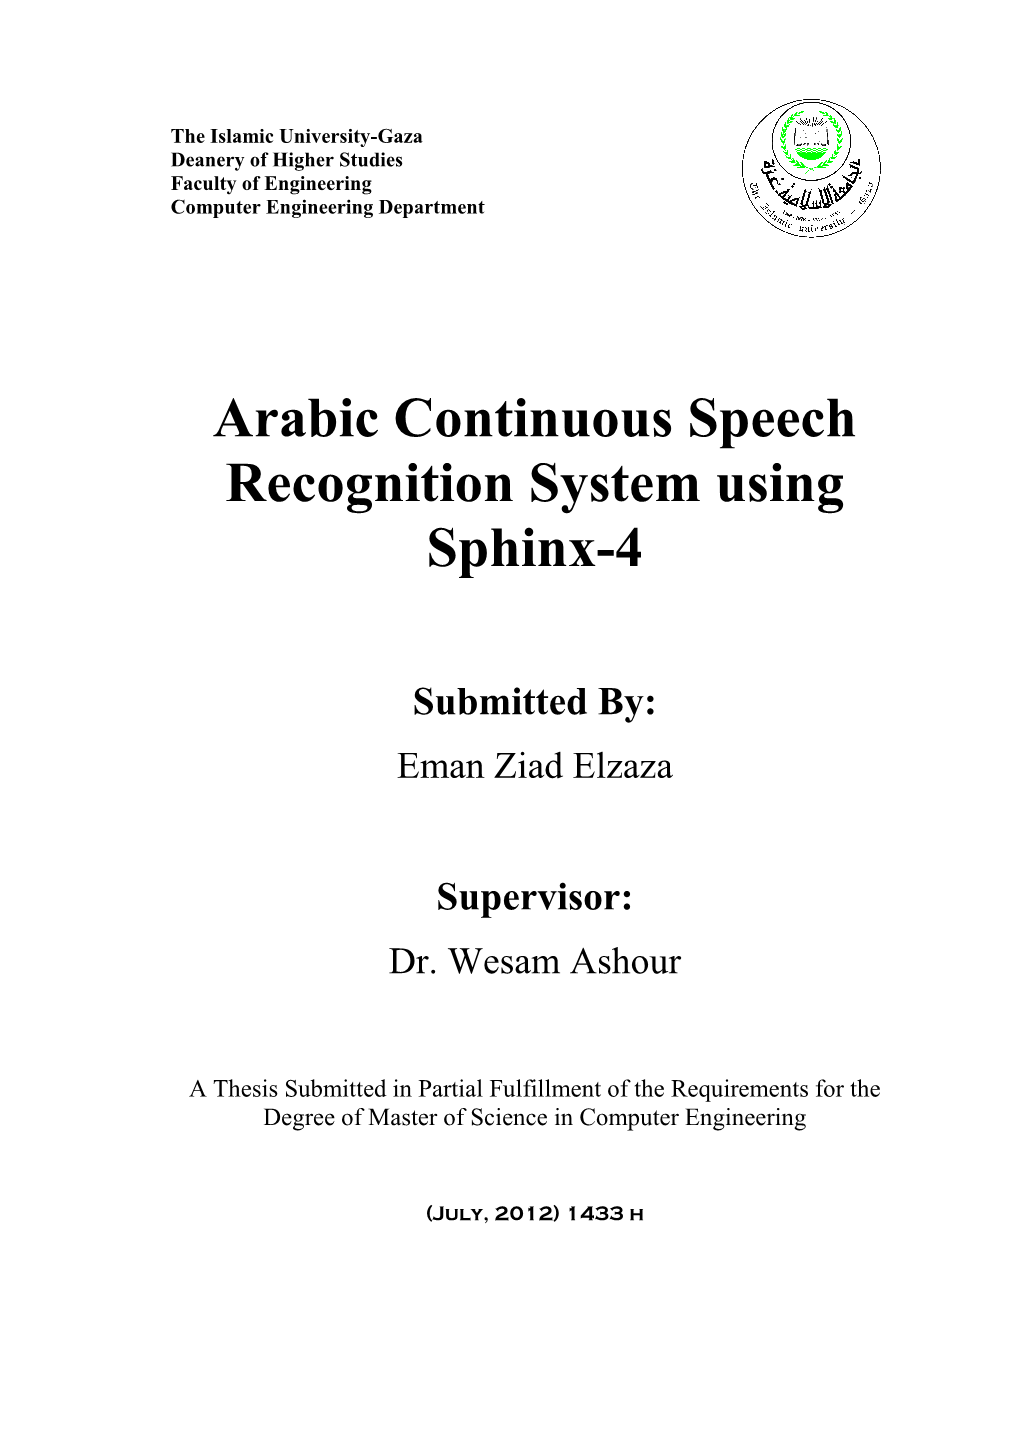 Arabic Continuous Speech Recognition System Using Sphinx-4